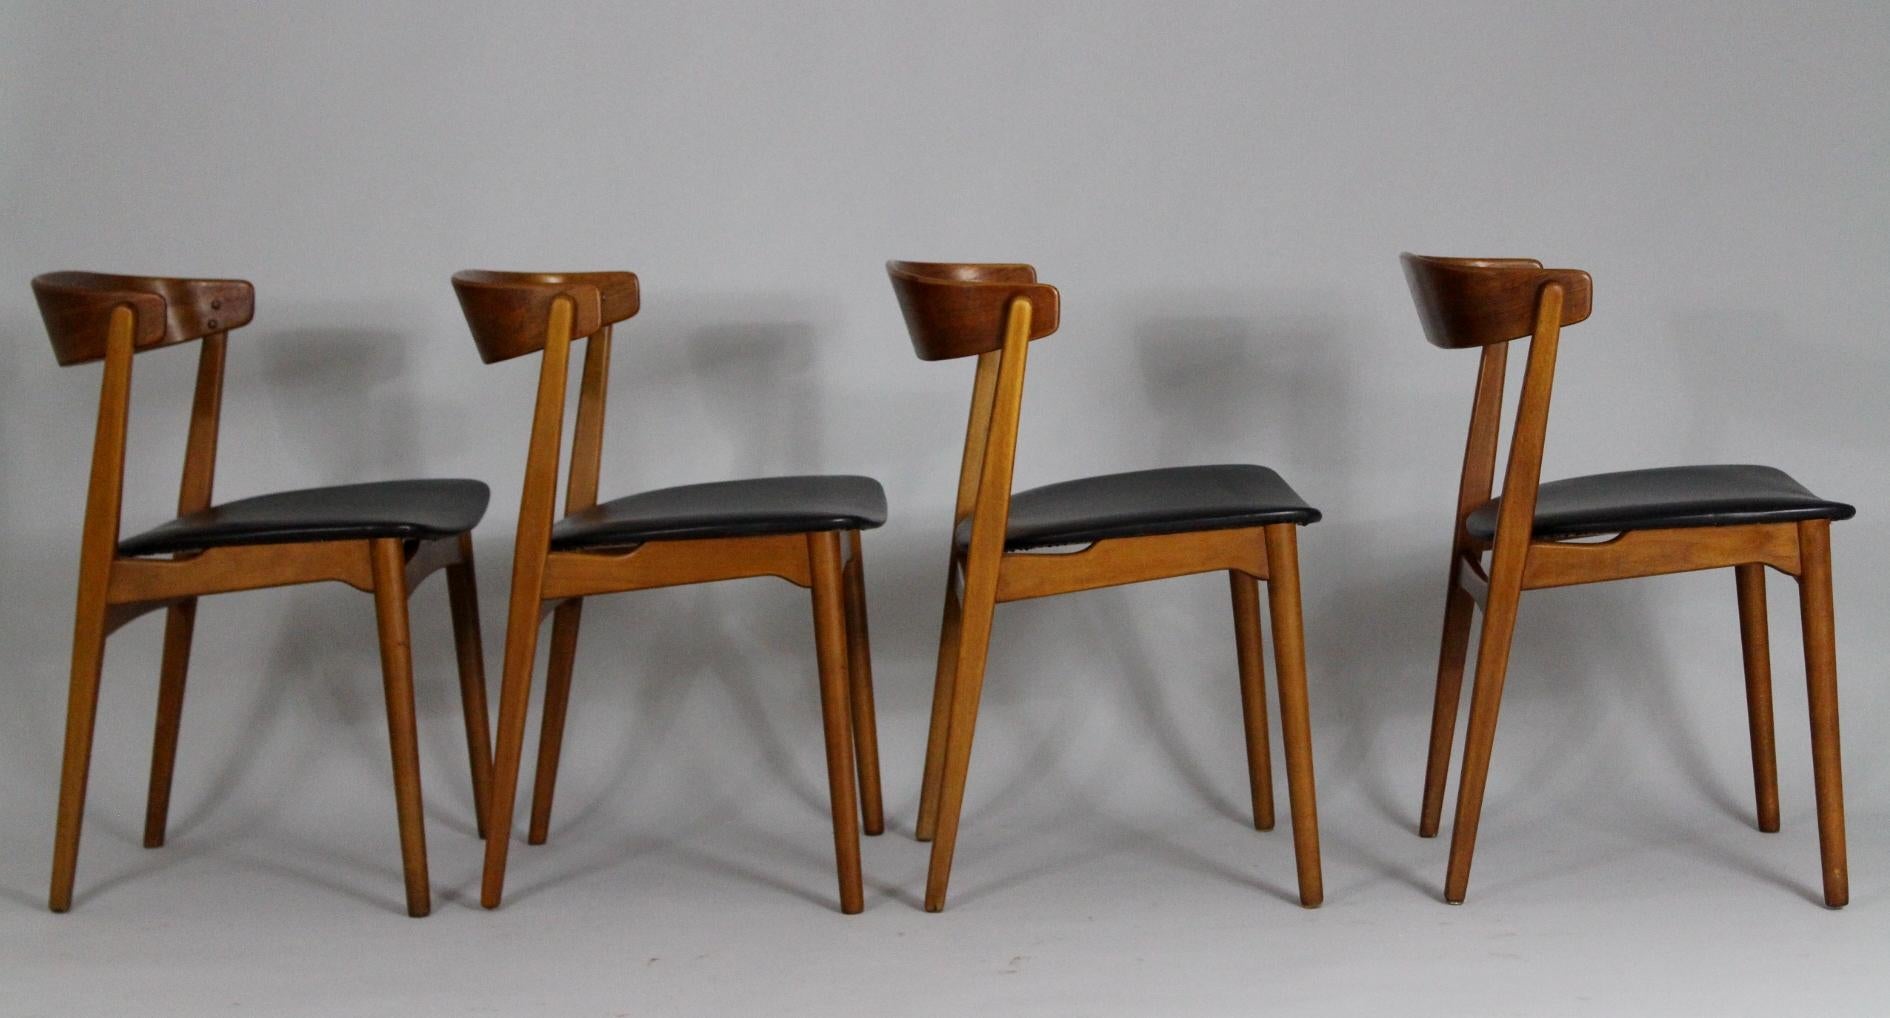 Set of four Scandinavian dining chairs from the 1960s. Material is beech and teak, seat is in black faux leather. Very good condition.